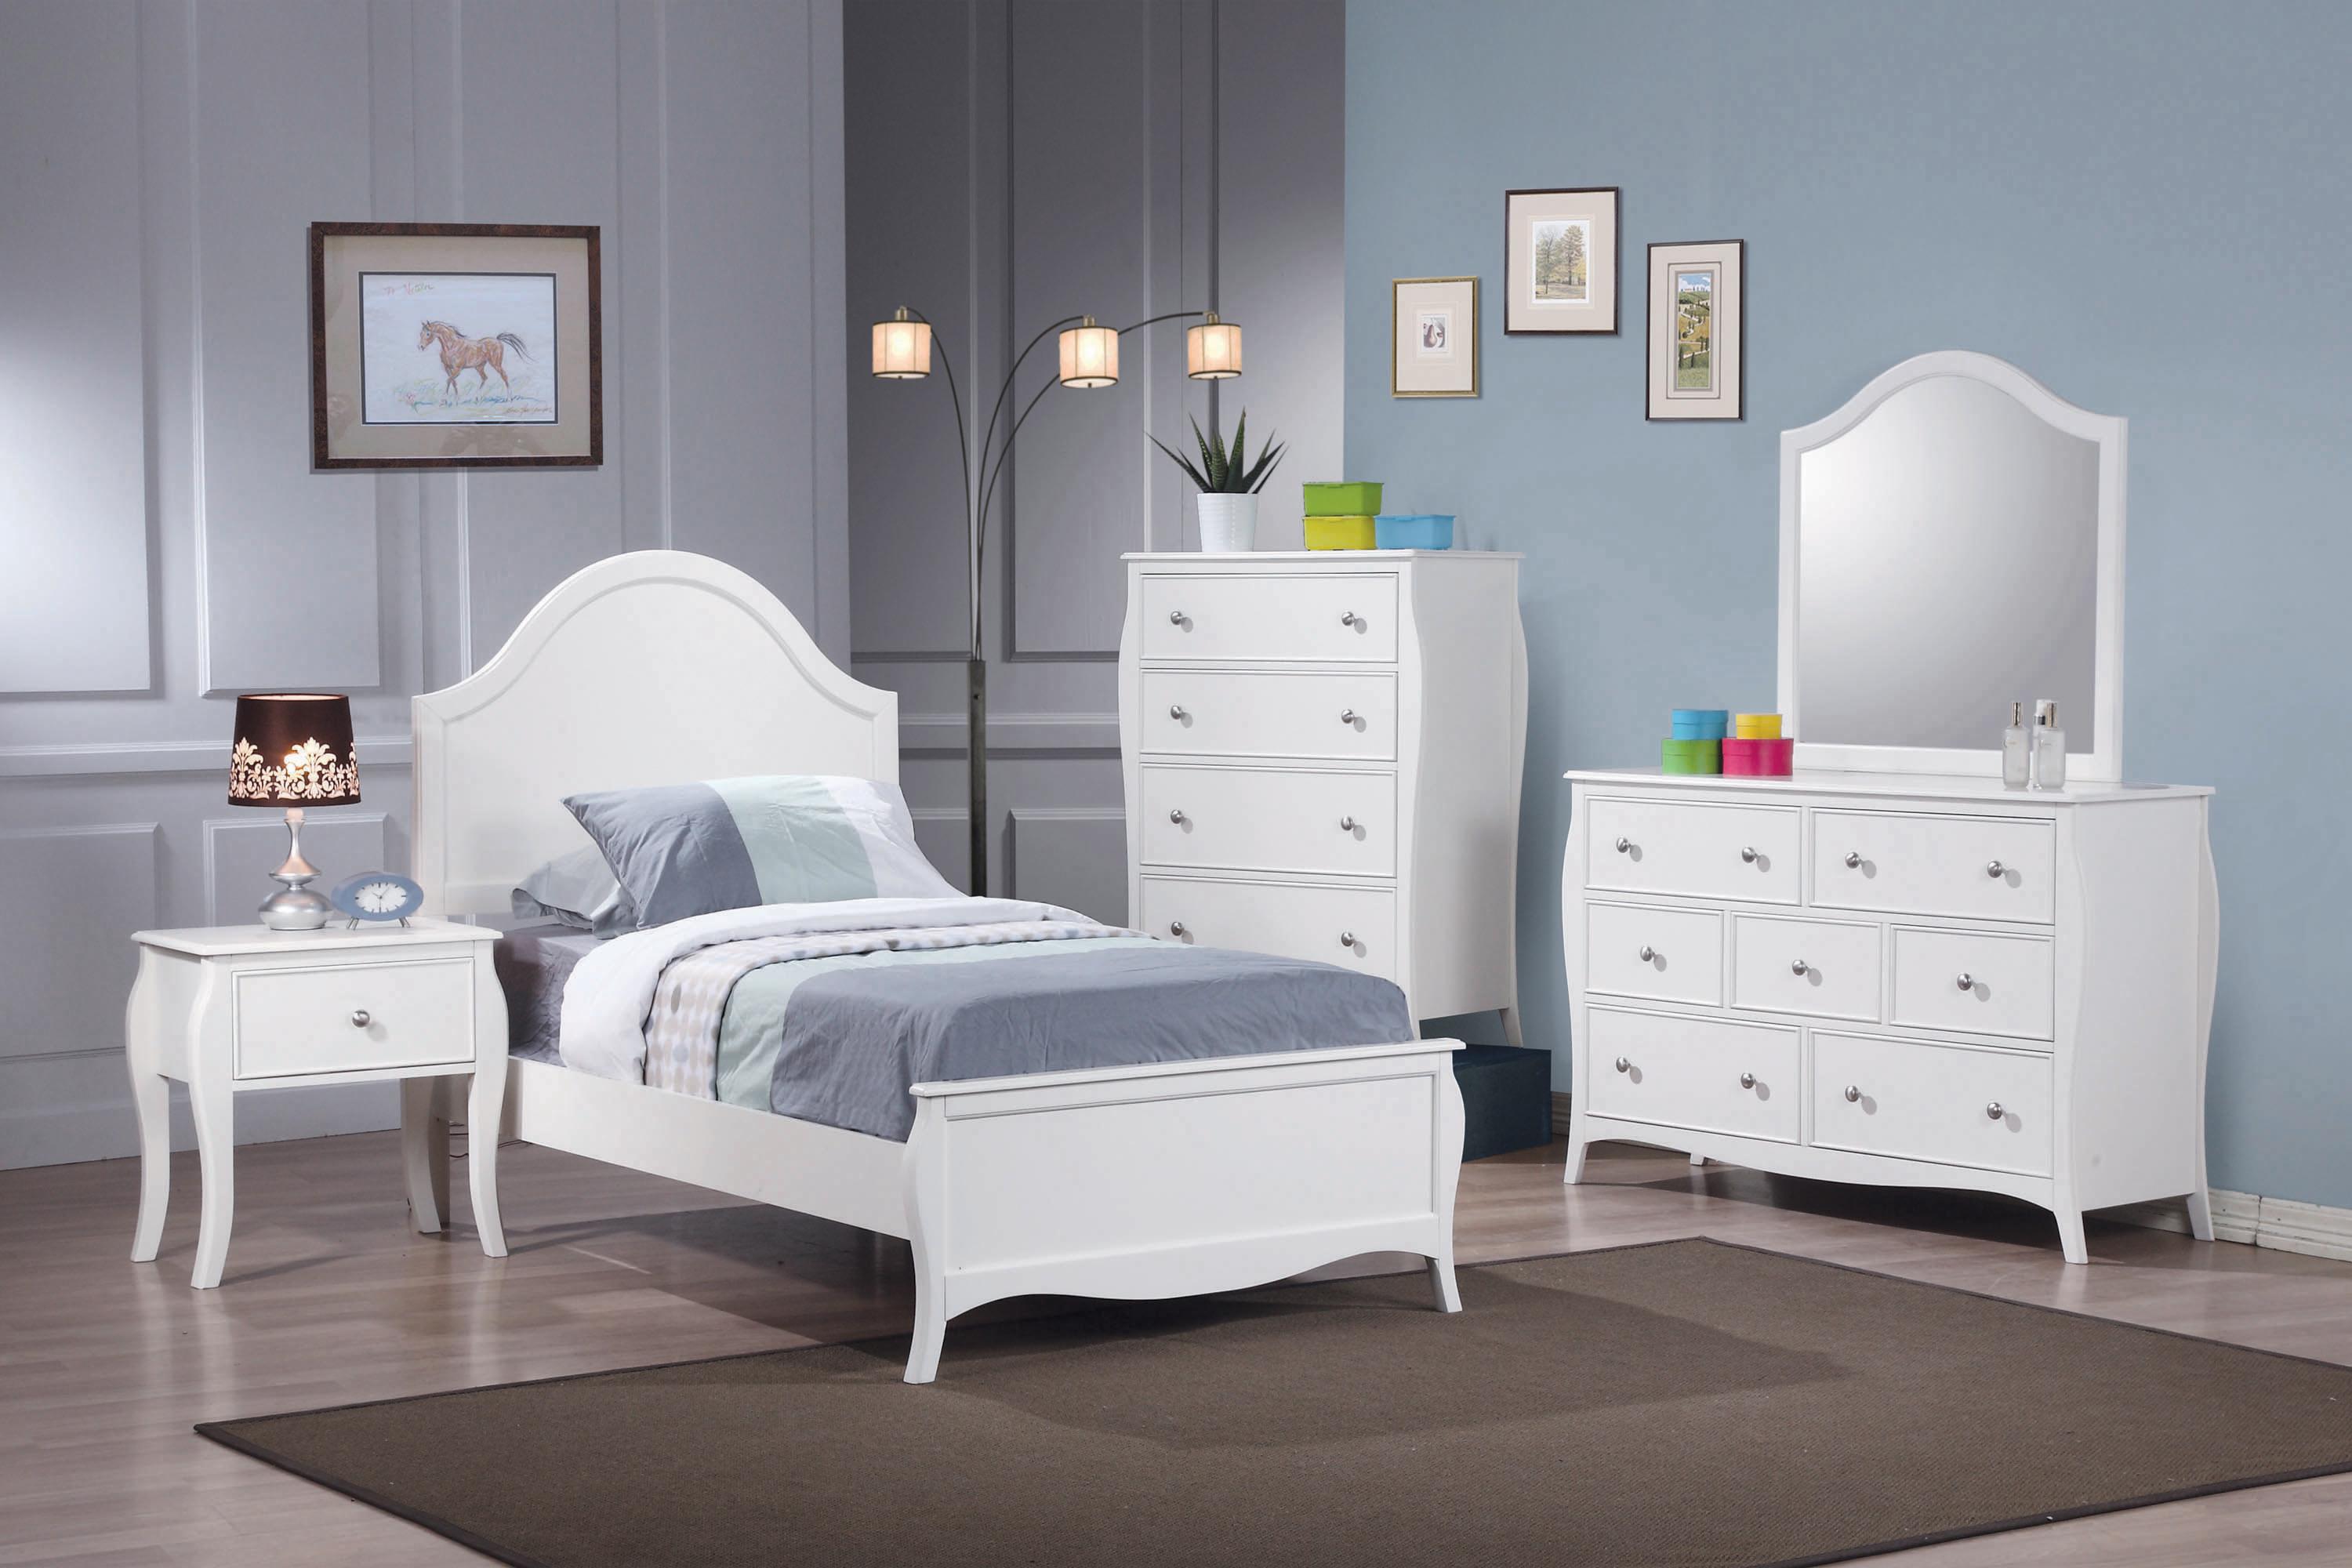 Traditional Bedroom Set 400561F-6PC Dominique 400561F-6PC in White 